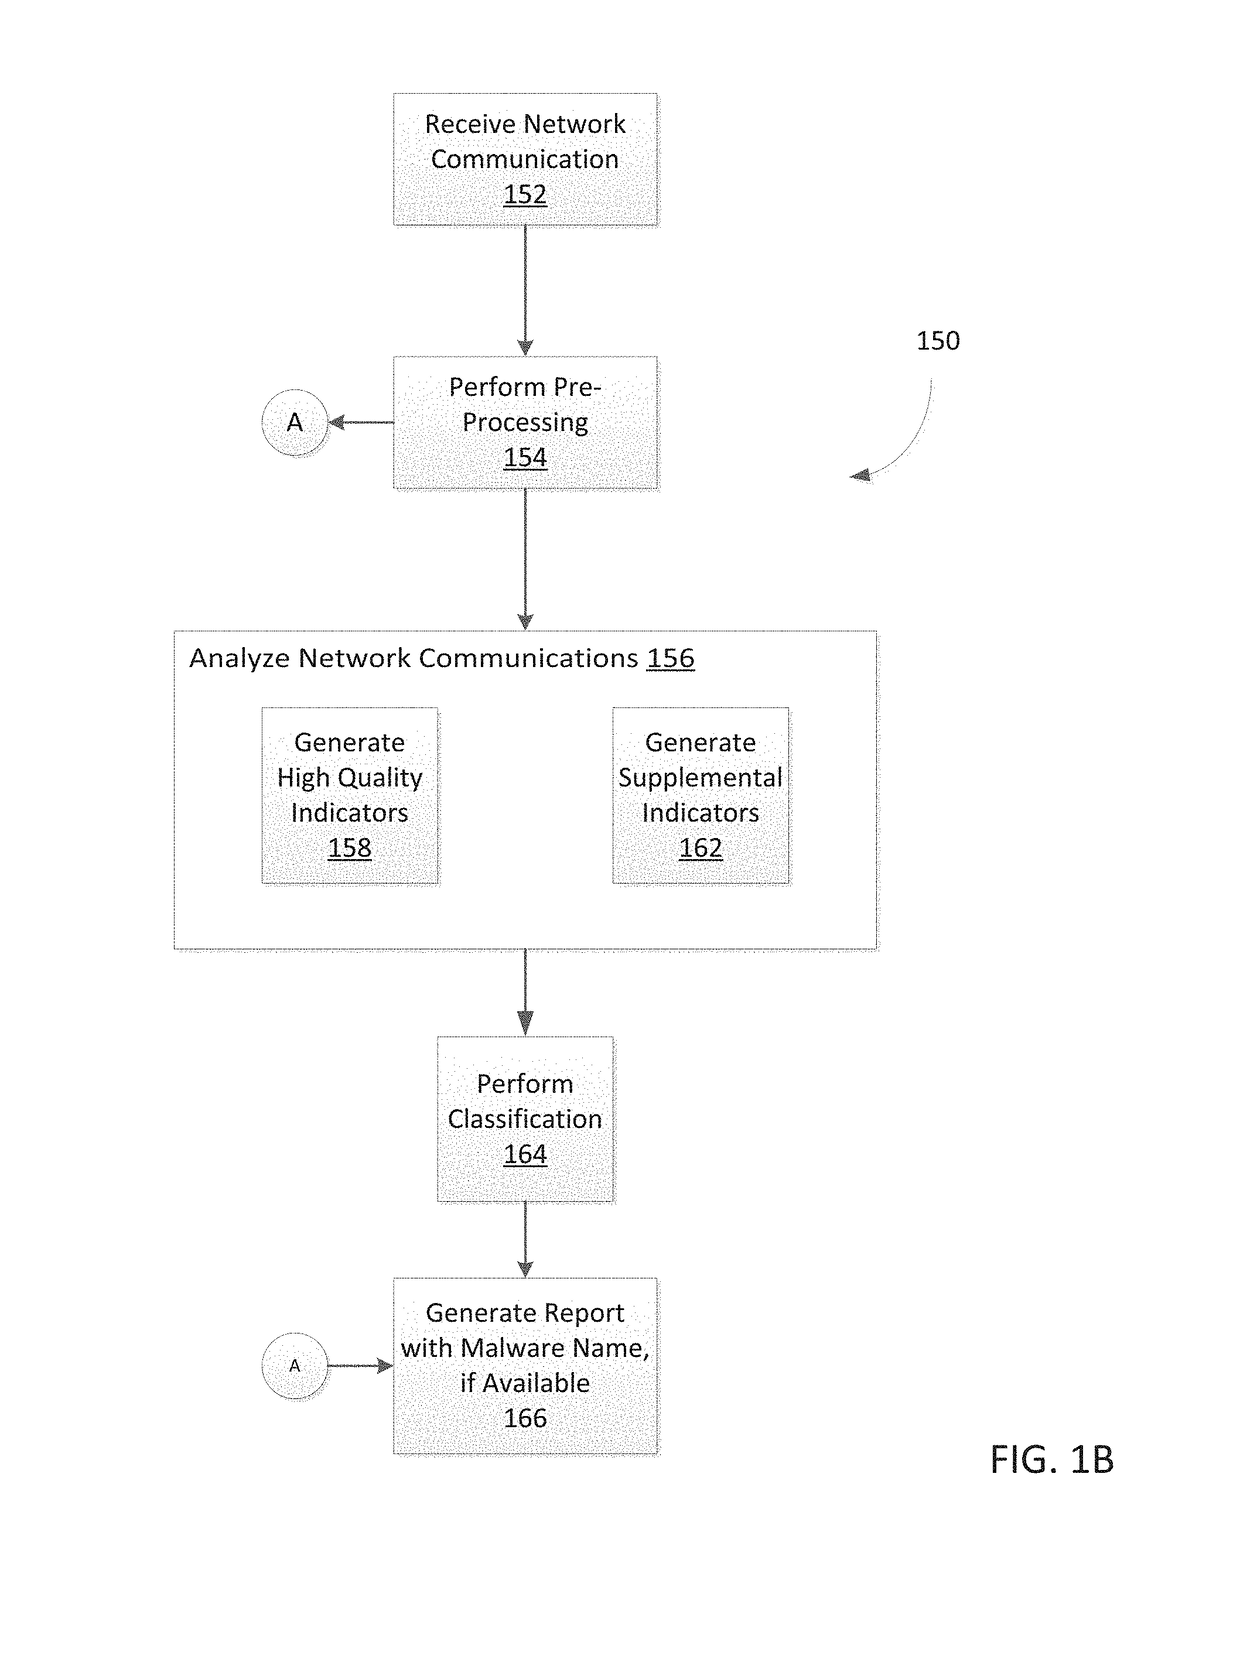 System and method for detecting malicious activity and classifying a network communication based on different indicator types